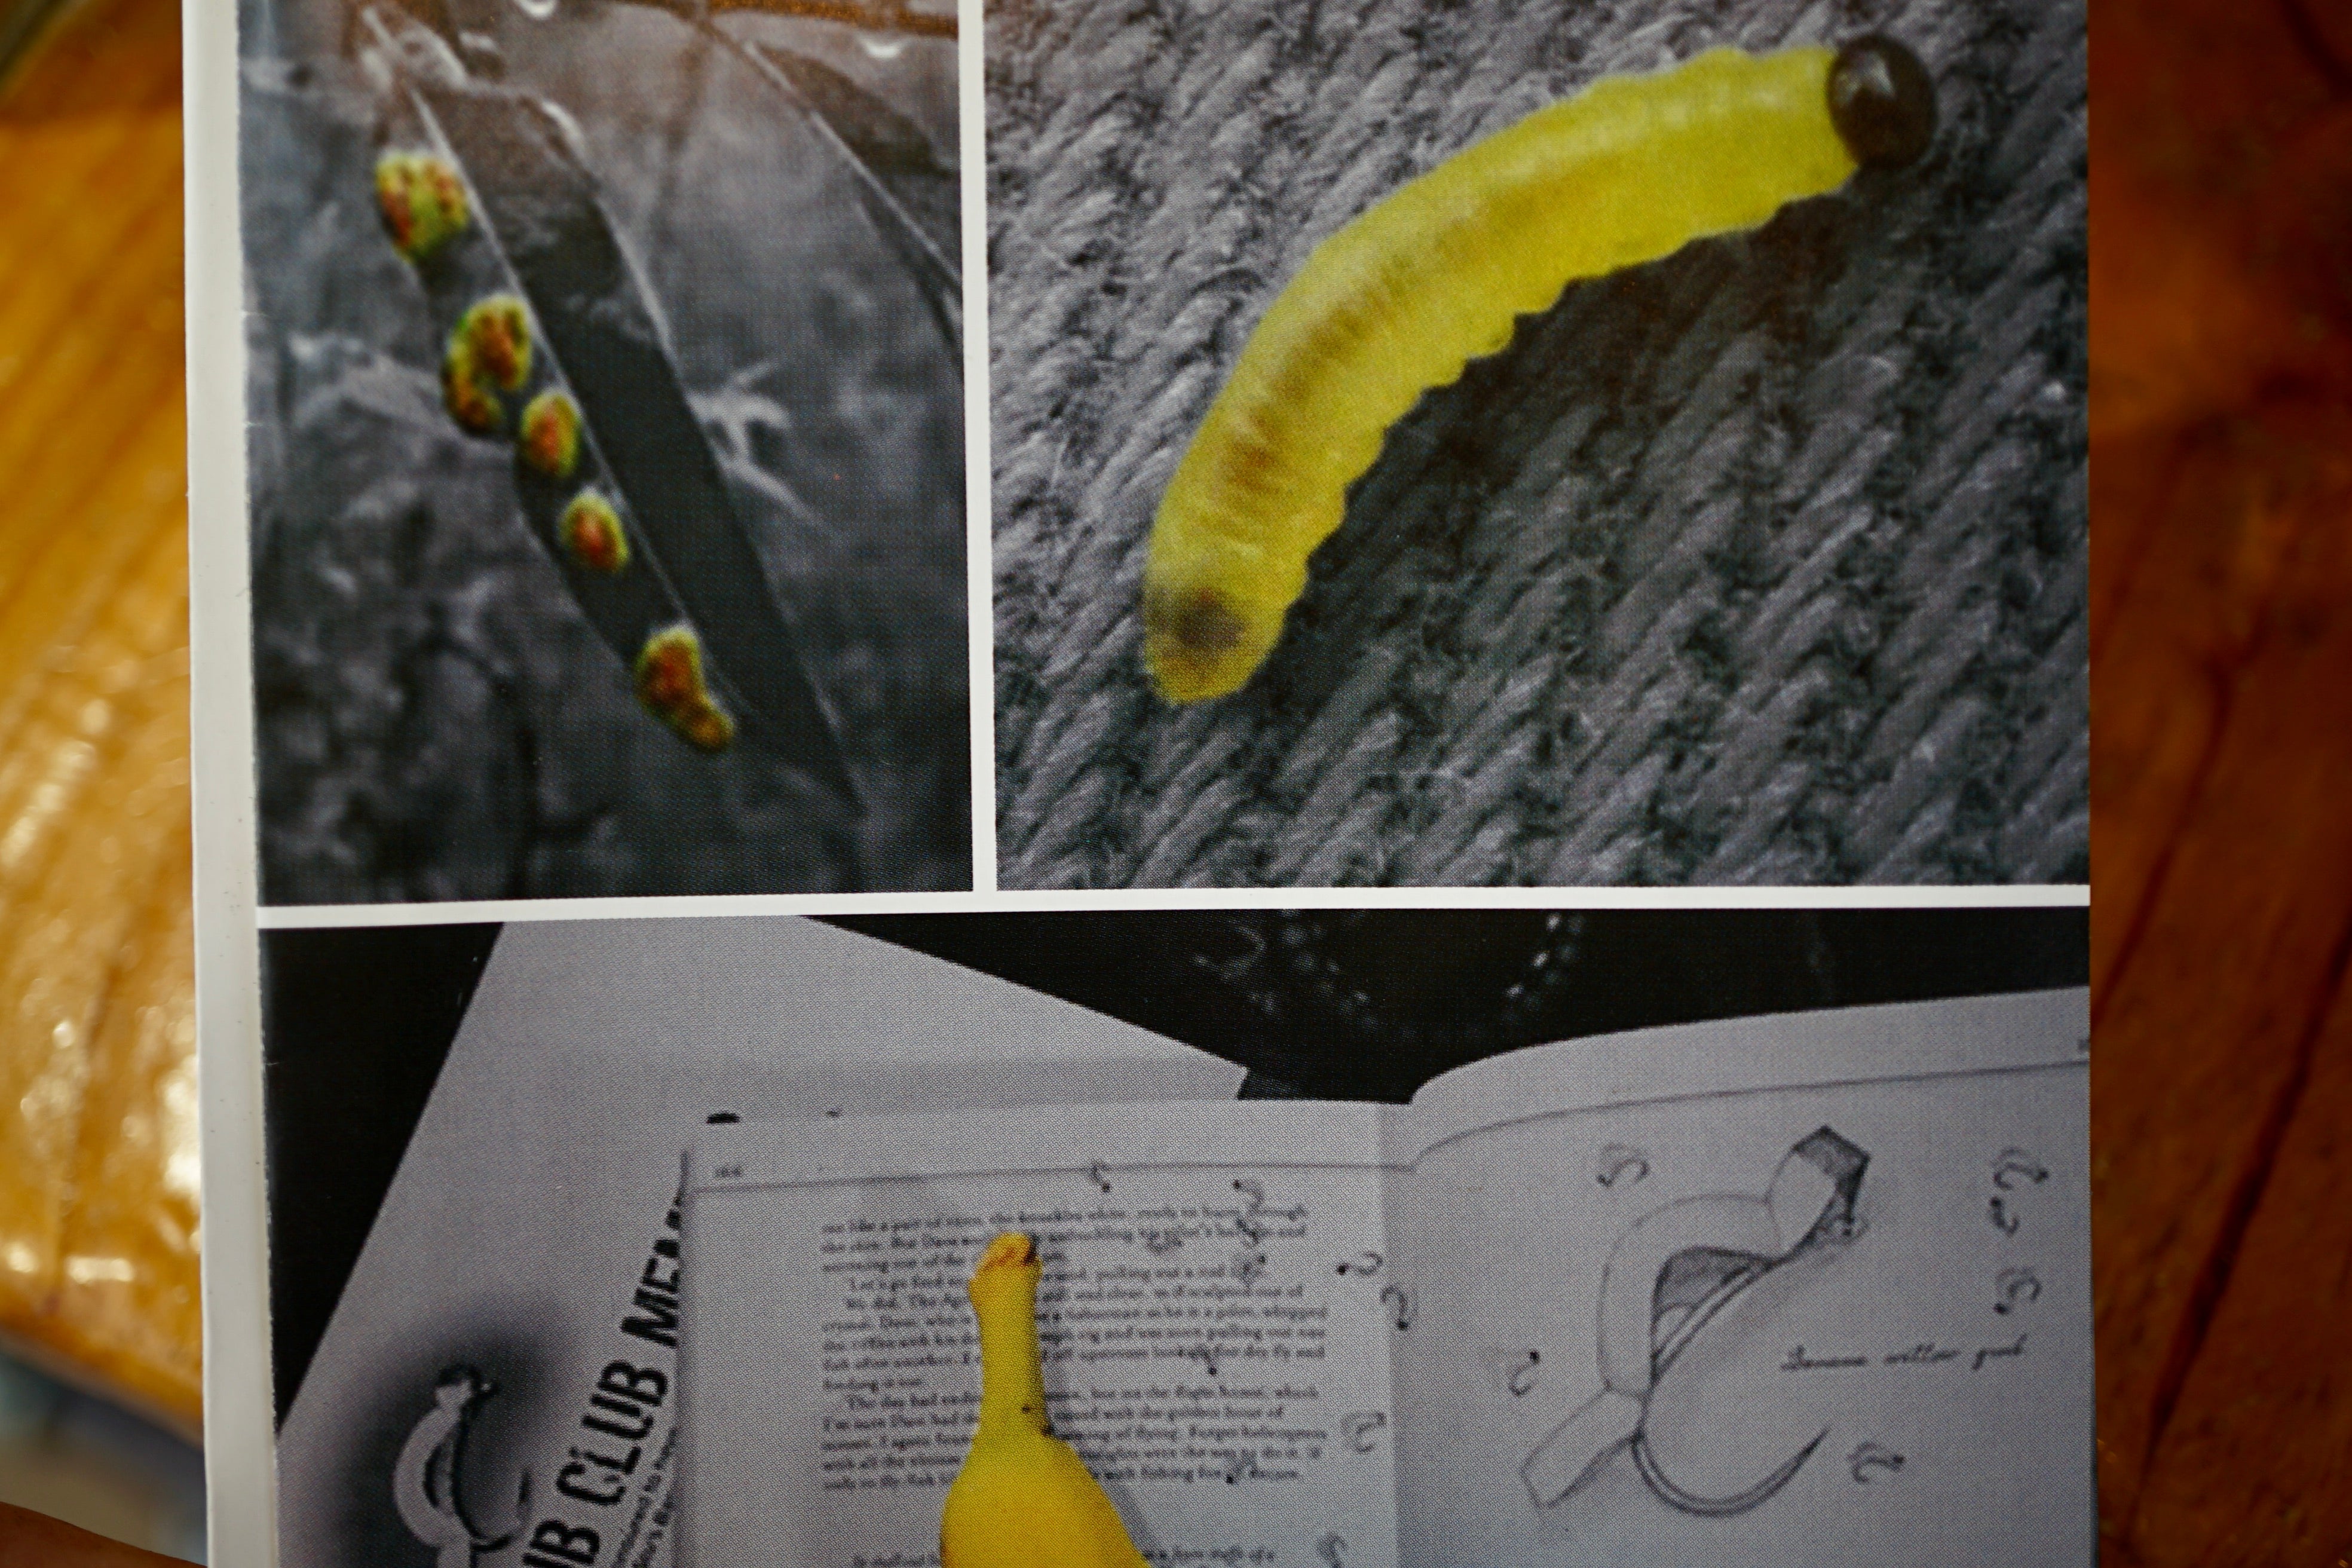 Floating Willow Grub Fly-Famous Original Banana Fly